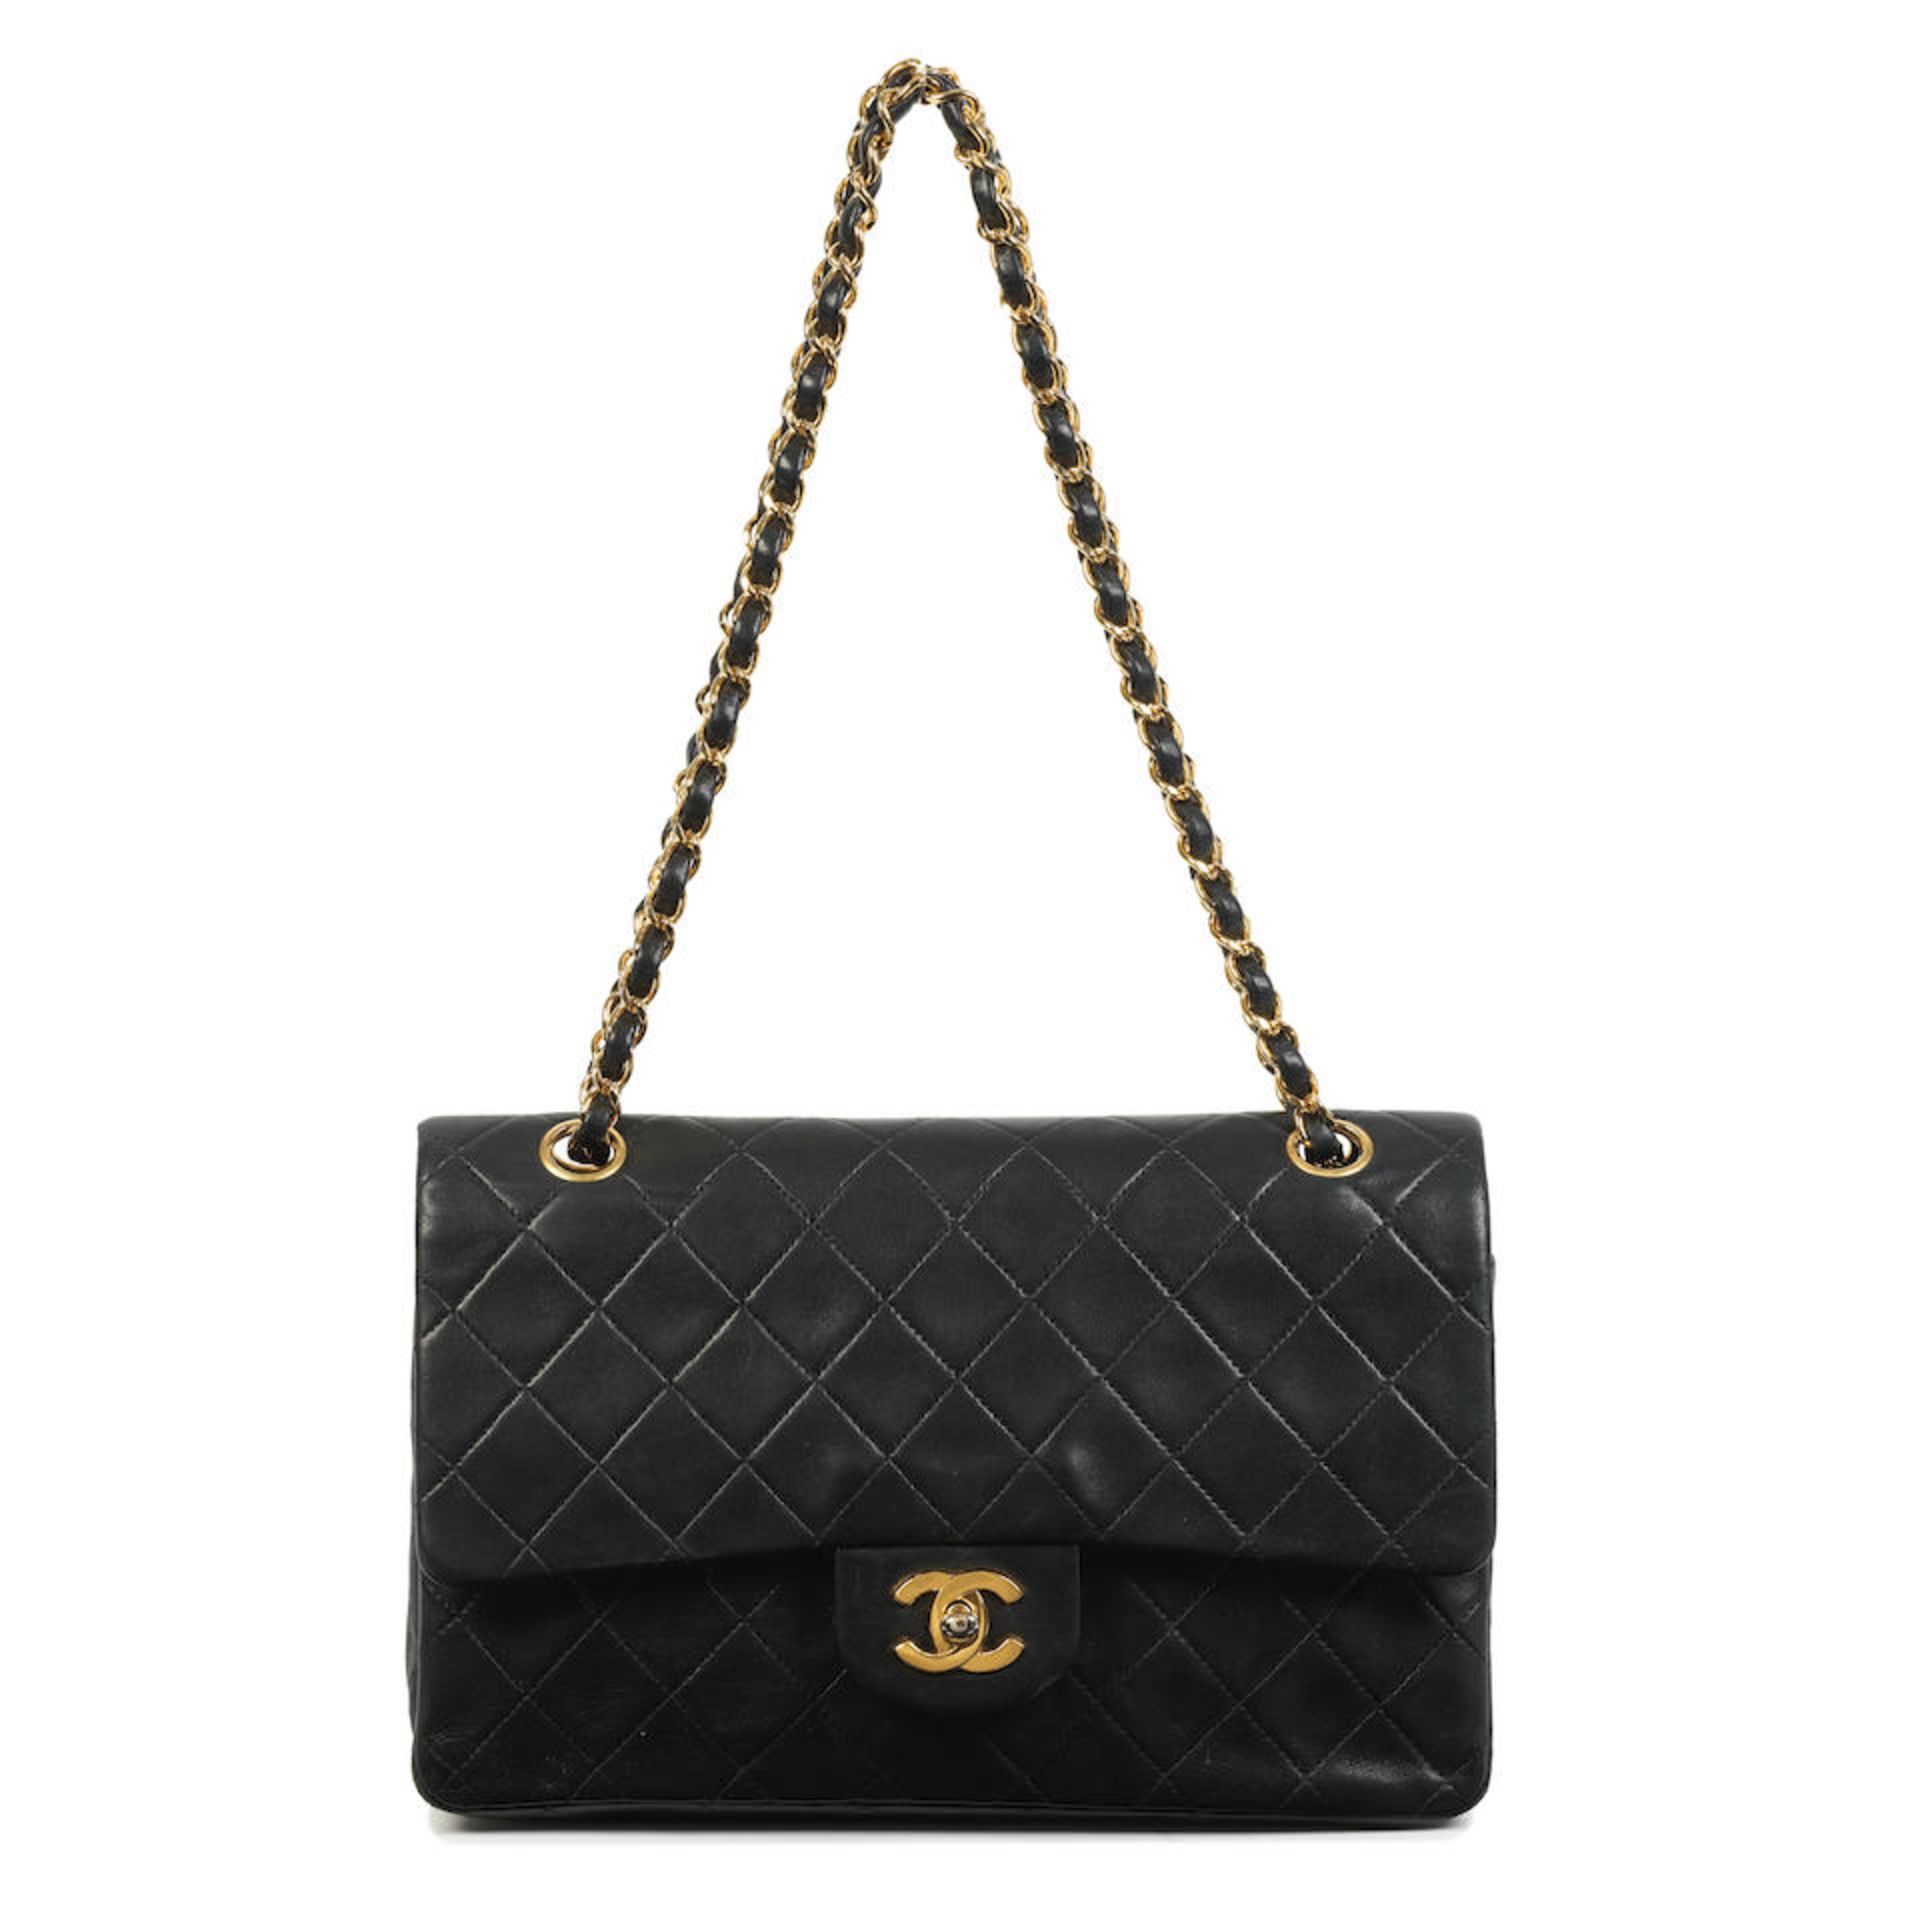 Karl Lagerfeld for Chanel: a Black Lambskin Medium Classic Double Flap Bag 1991-94 (includes ser...